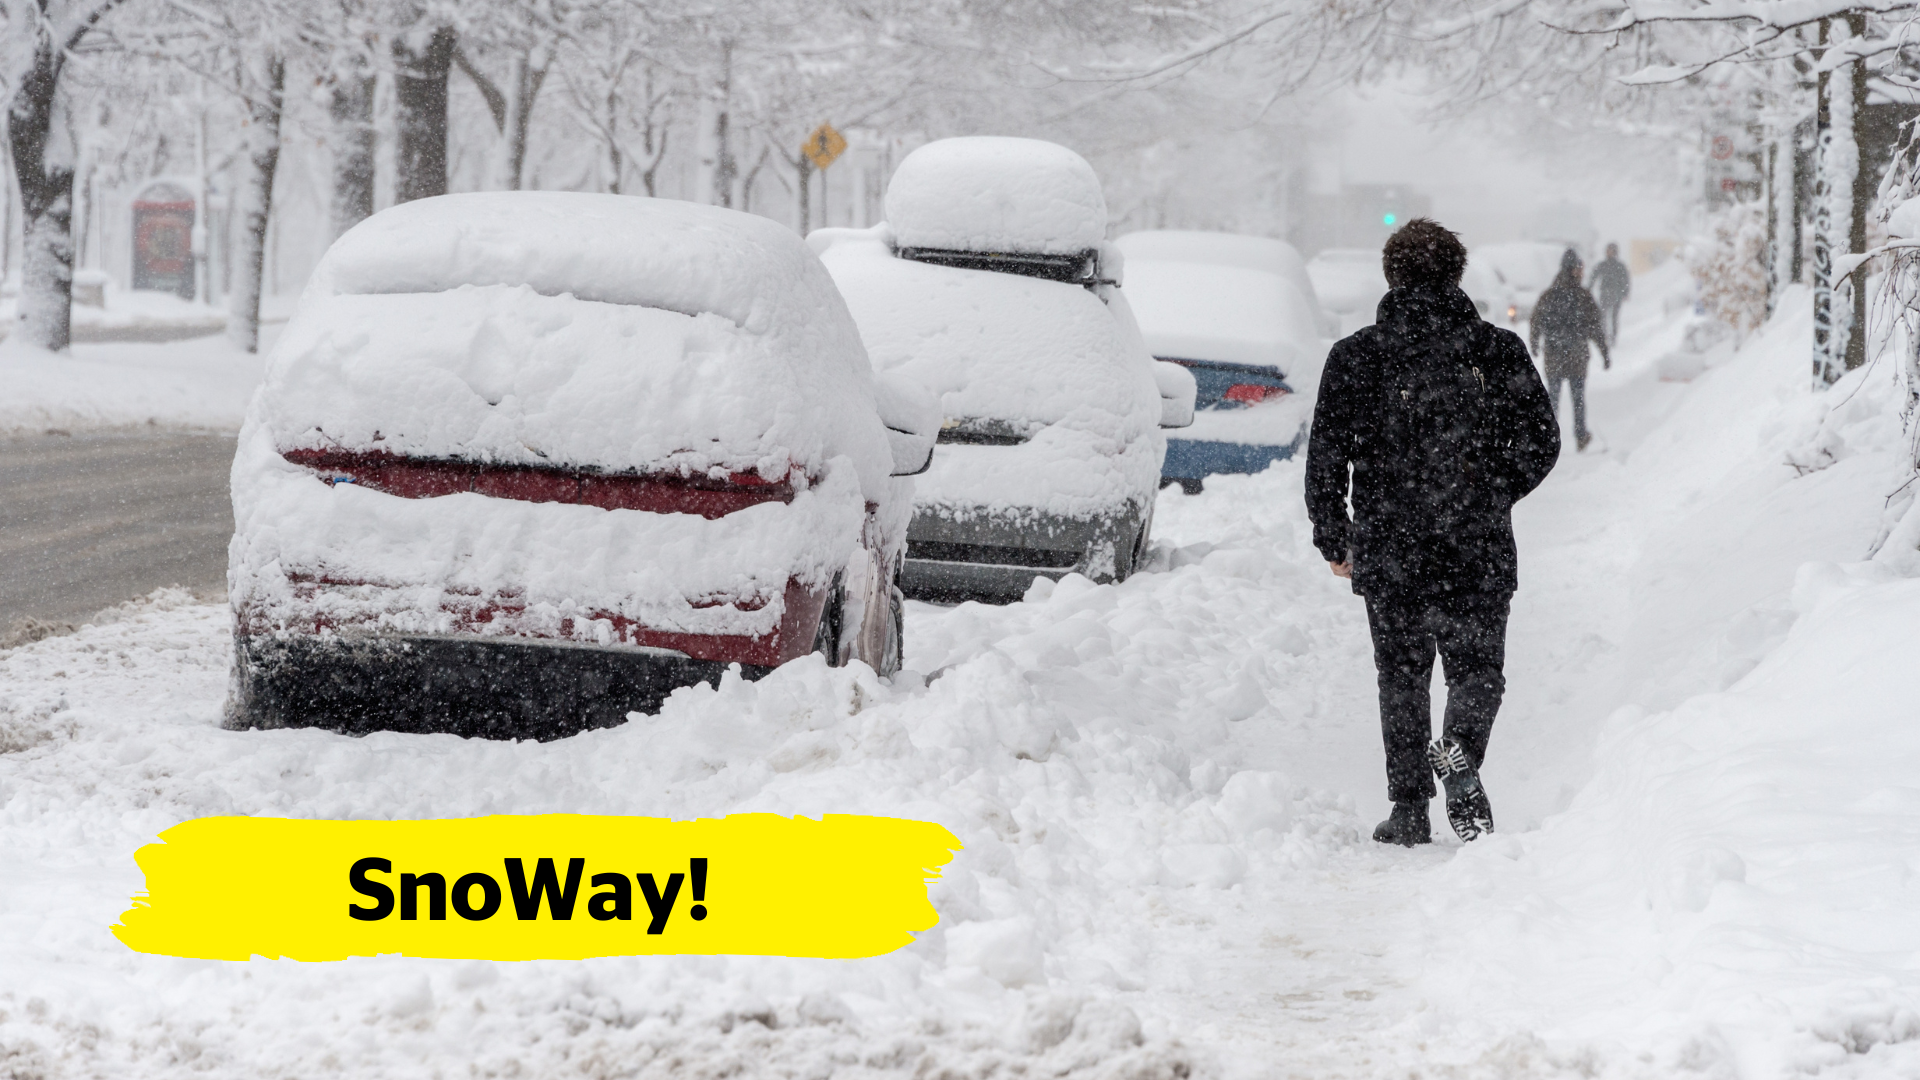 A residential street, sidewalks, and parked cars are covered in snow. A man walks down a snow-covered sidewalk.In the bottom left-hand corner of the image, there is a yellow banner overlay with the text “SnoWay!”